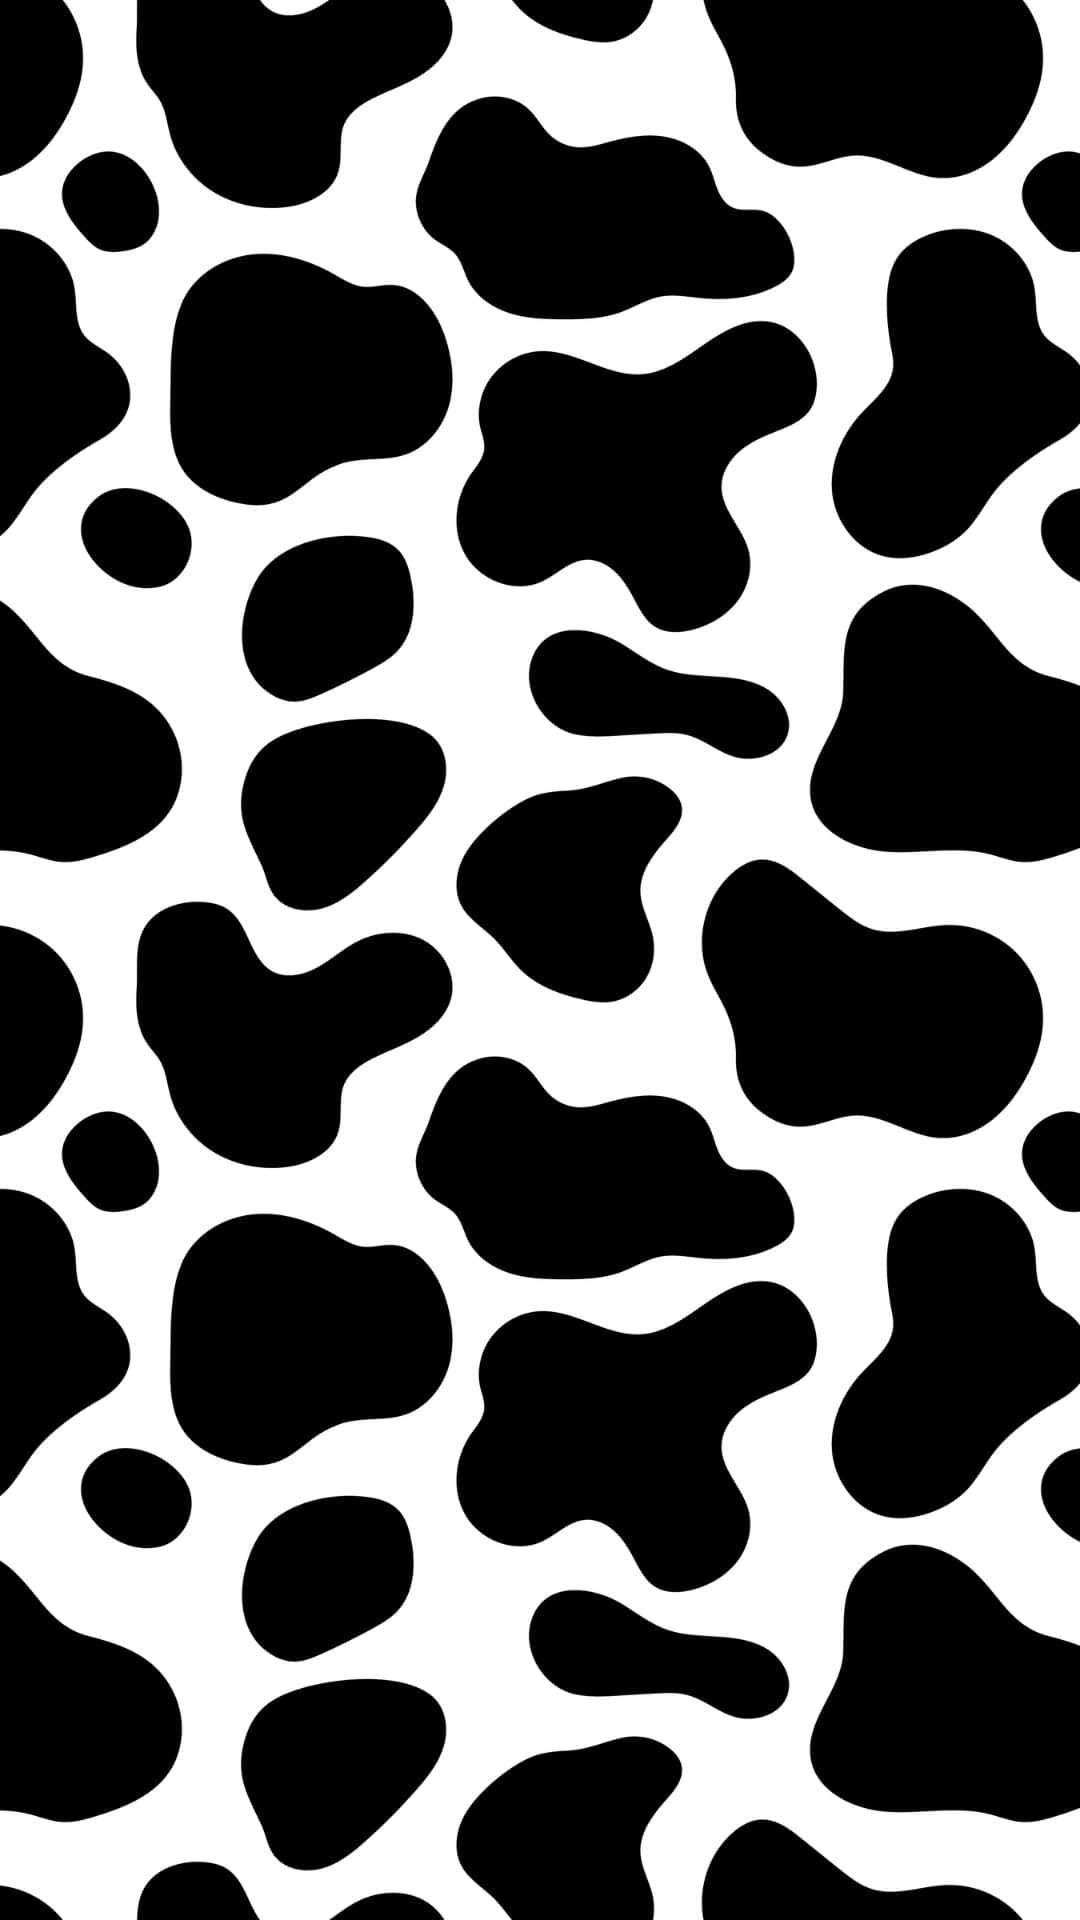 Let Your Iphone Keep Up With The Moo-vement With Our Cow Themed Phone Cases!